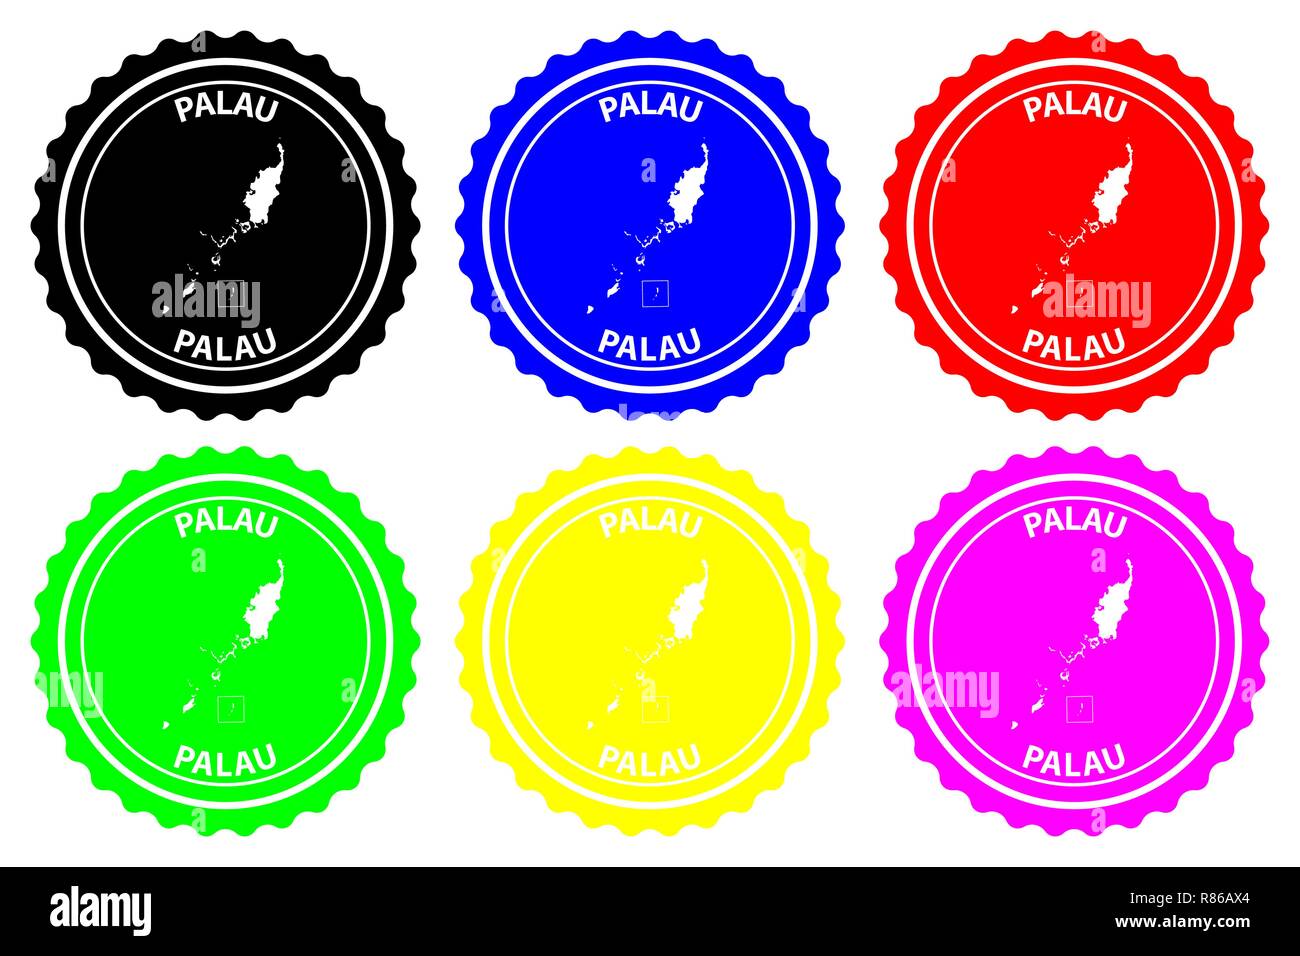 Palau - rubber stamp - vector, Republic of Palau island (Belau, Palaos, or Pelew) map pattern - sticker - black, blue, green, yellow, purple and red Stock Vector